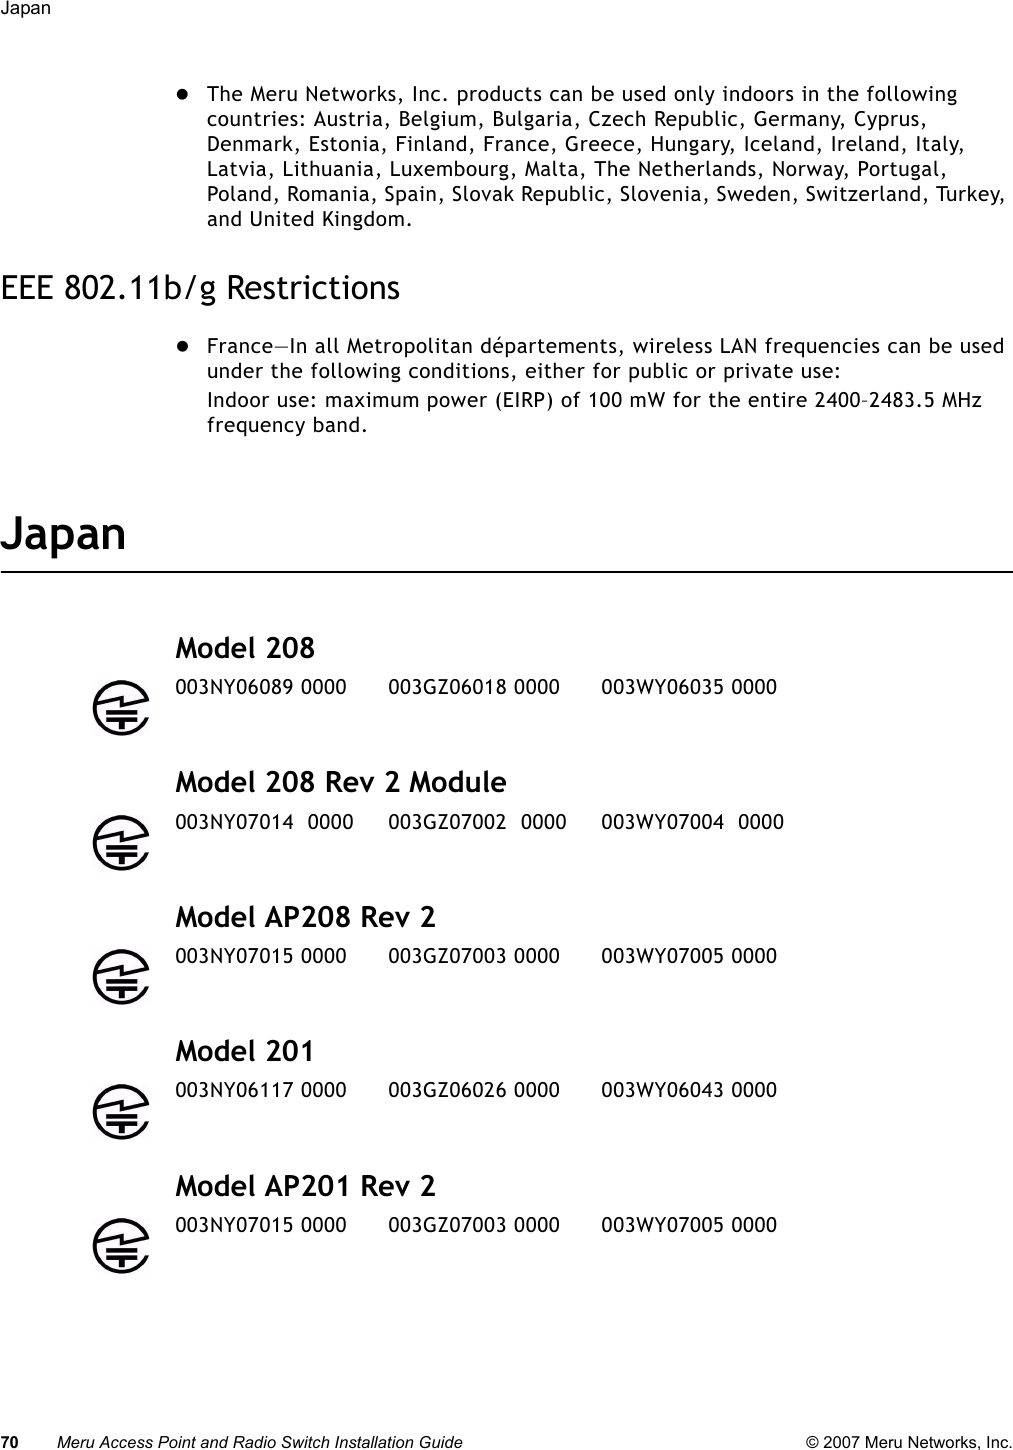 70 Meru Access Point and Radio Switch Installation Guide © 2007 Meru Networks, Inc.Japan zThe Meru Networks, Inc. products can be used only indoors in the following countries: Austria, Belgium, Bulgaria, Czech Republic, Germany, Cyprus, Denmark, Estonia, Finland, France, Greece, Hungary, Iceland, Ireland, Italy, Latvia, Lithuania, Luxembourg, Malta, The Netherlands, Norway, Portugal, Poland, Romania, Spain, Slovak Republic, Slovenia, Sweden, Switzerland, Turkey, and United Kingdom. EEE 802.11b/g RestrictionszFrance—In all Metropolitan départements, wireless LAN frequencies can be used under the following conditions, either for public or private use: Indoor use: maximum power (EIRP) of 100 mW for the entire 2400–2483.5 MHz frequency band. JapanModel 208Model 208 Rev 2 ModuleModel AP208 Rev 2Model 201Model AP201 Rev 2003NY06089 0000      003GZ06018 0000      003WY06035 0000003NY07014  0000     003GZ07002  0000     003WY07004  0000003NY07015 0000      003GZ07003 0000      003WY07005 0000003NY06117 0000      003GZ06026 0000      003WY06043 0000003NY07015 0000      003GZ07003 0000      003WY07005 0000